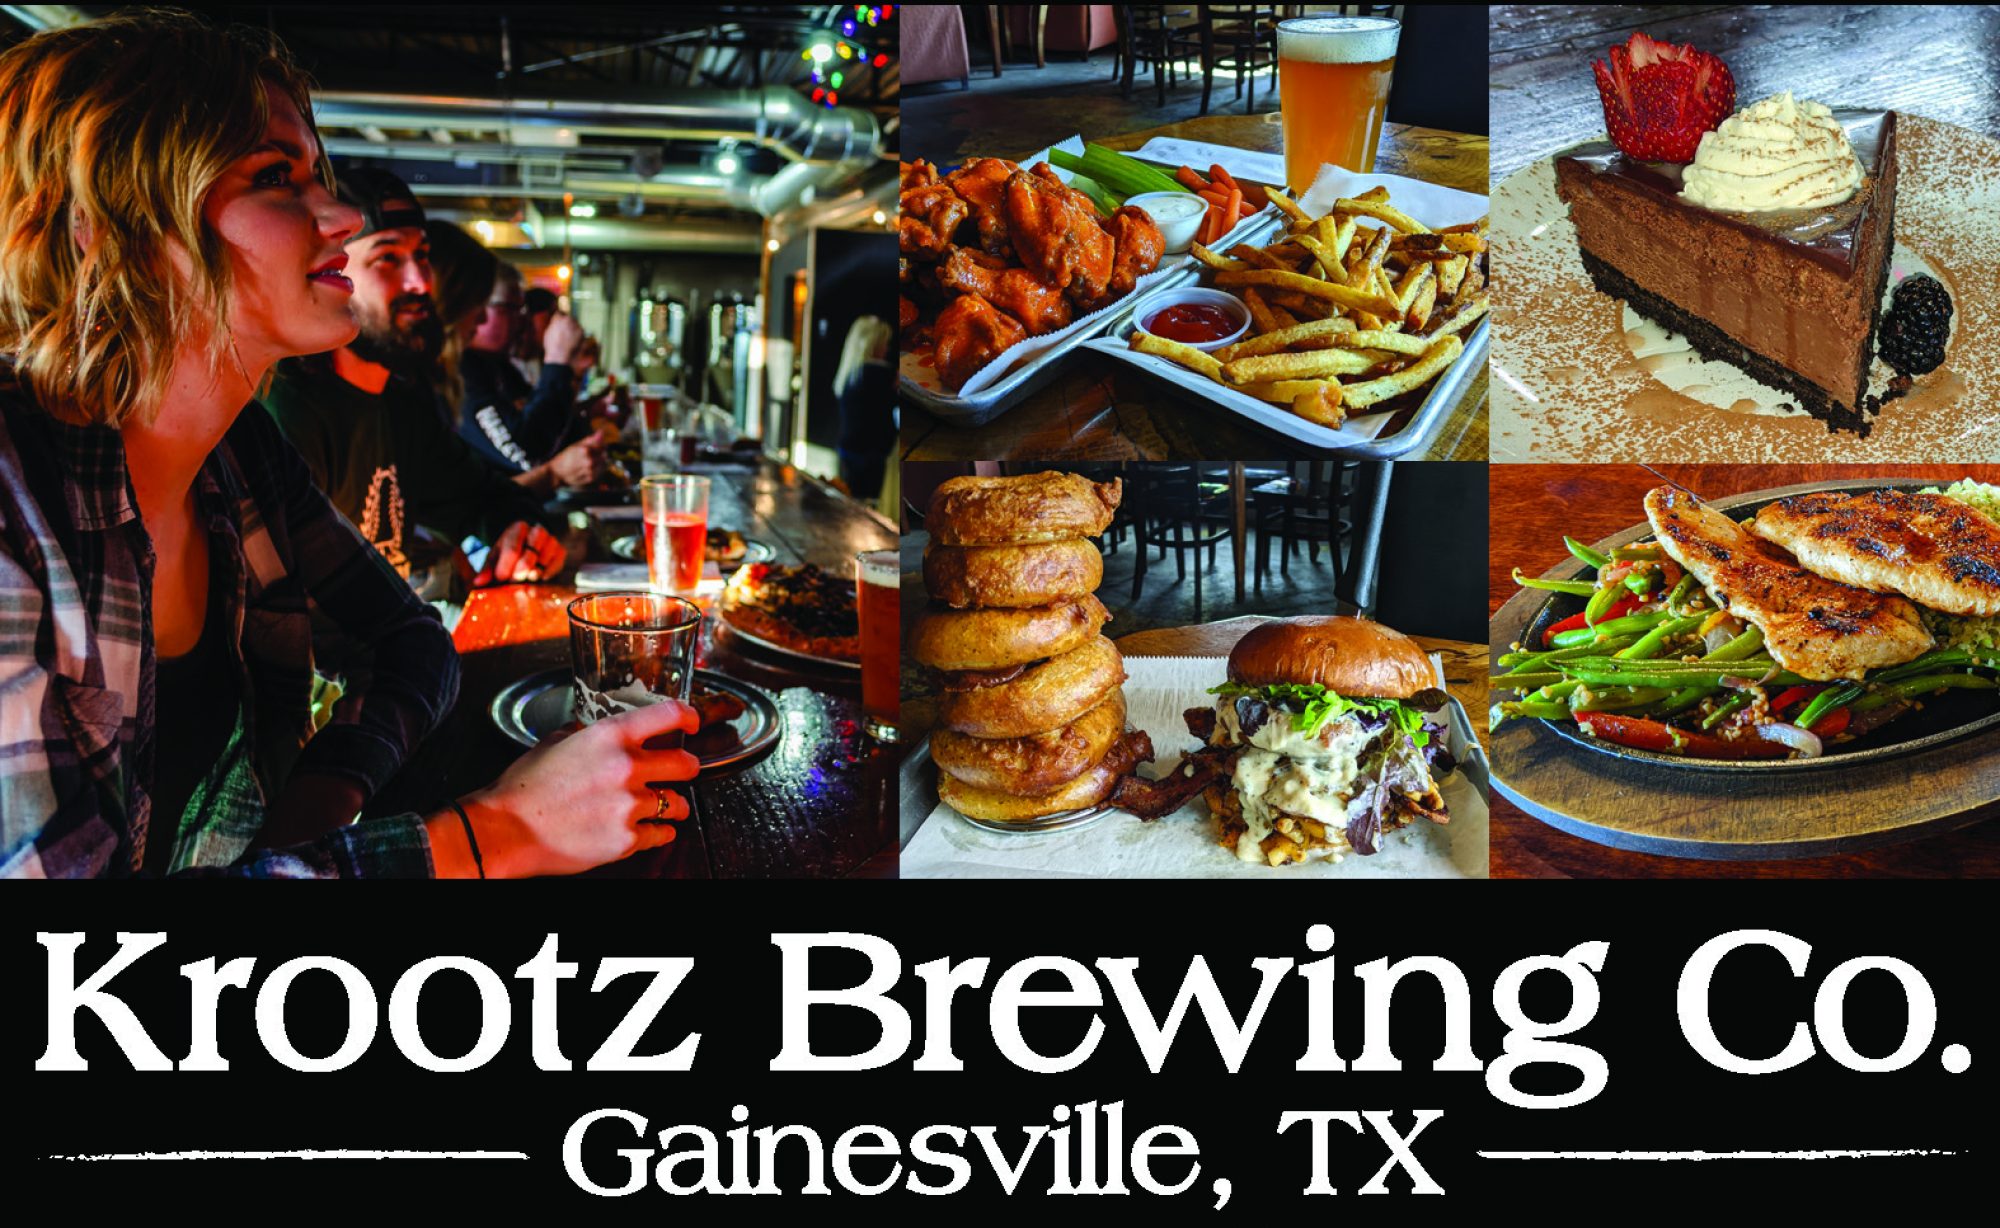 Krootz Brewing Company - Best food and beer in Gainesville Texas!